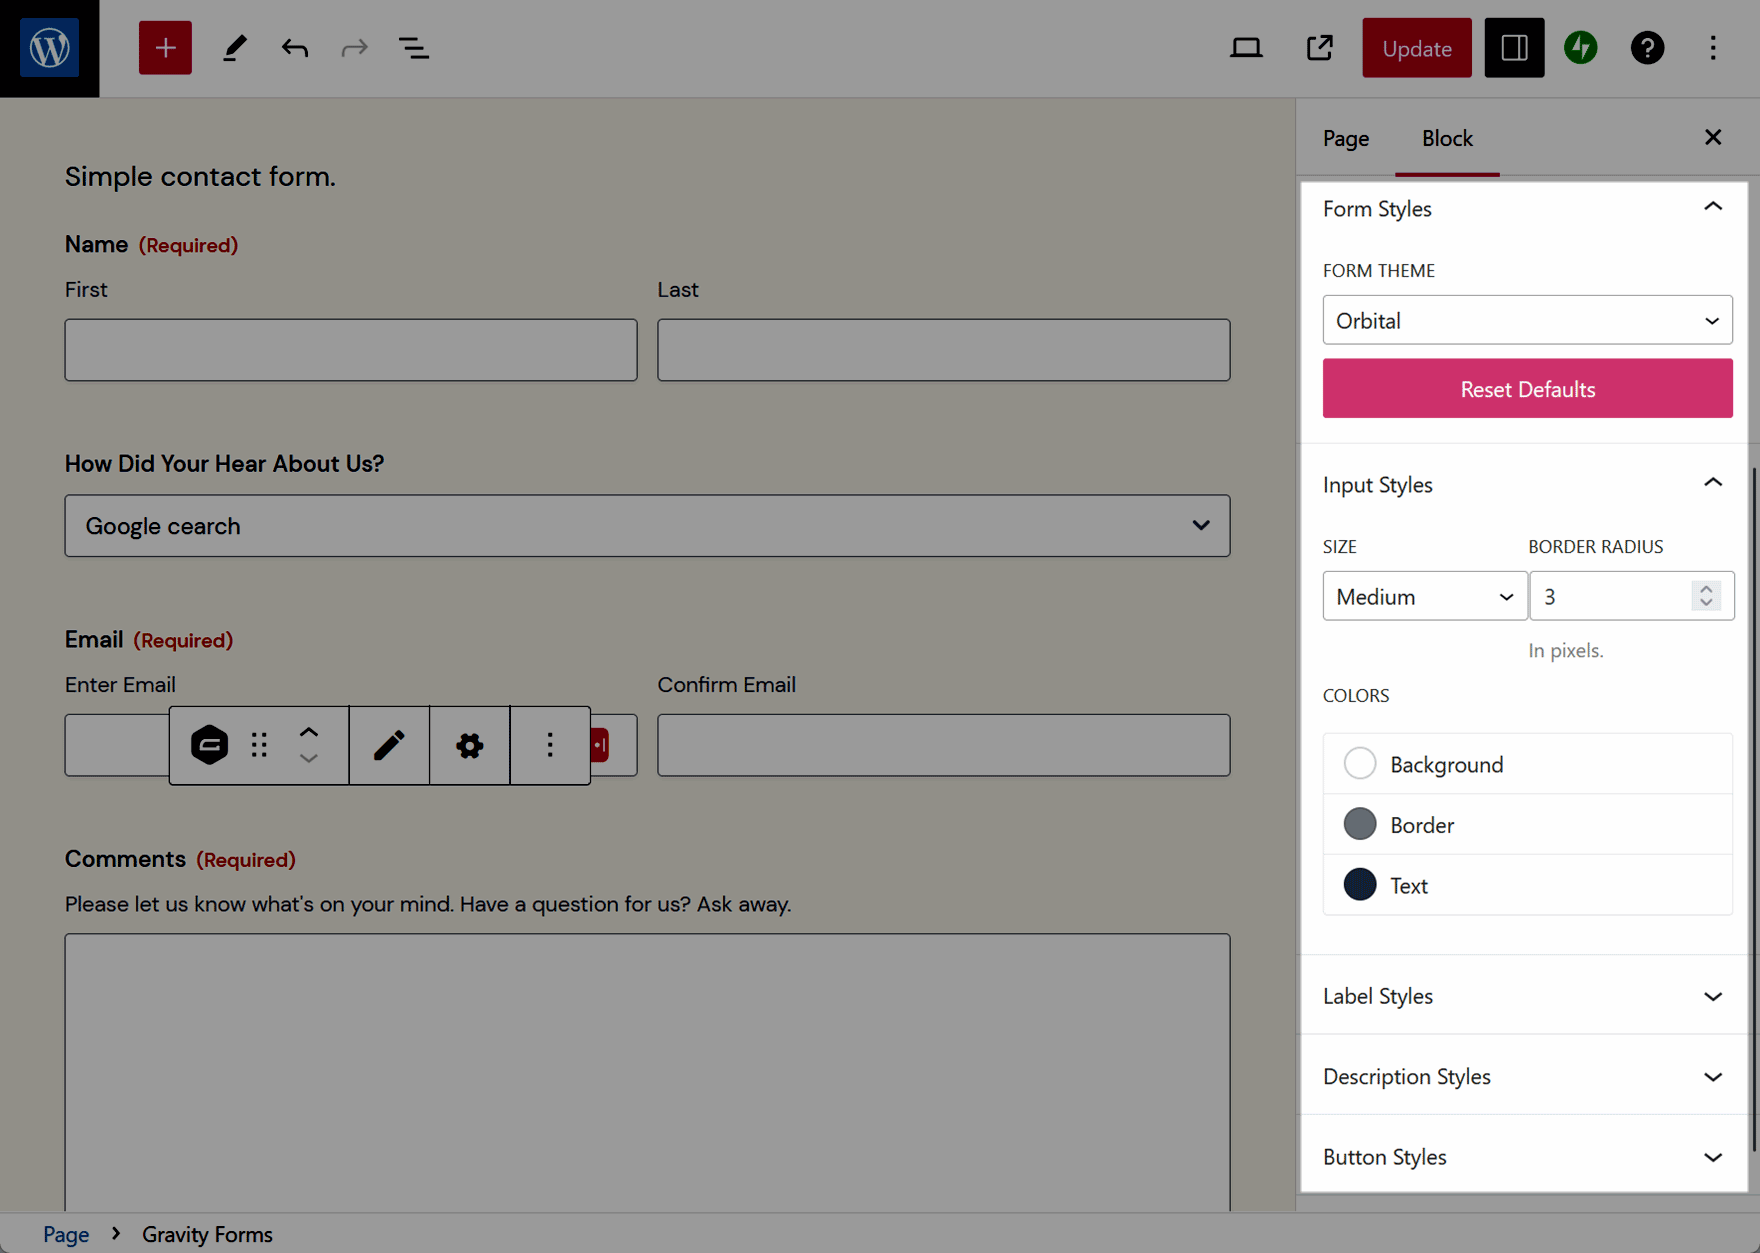 Customize Form Styles